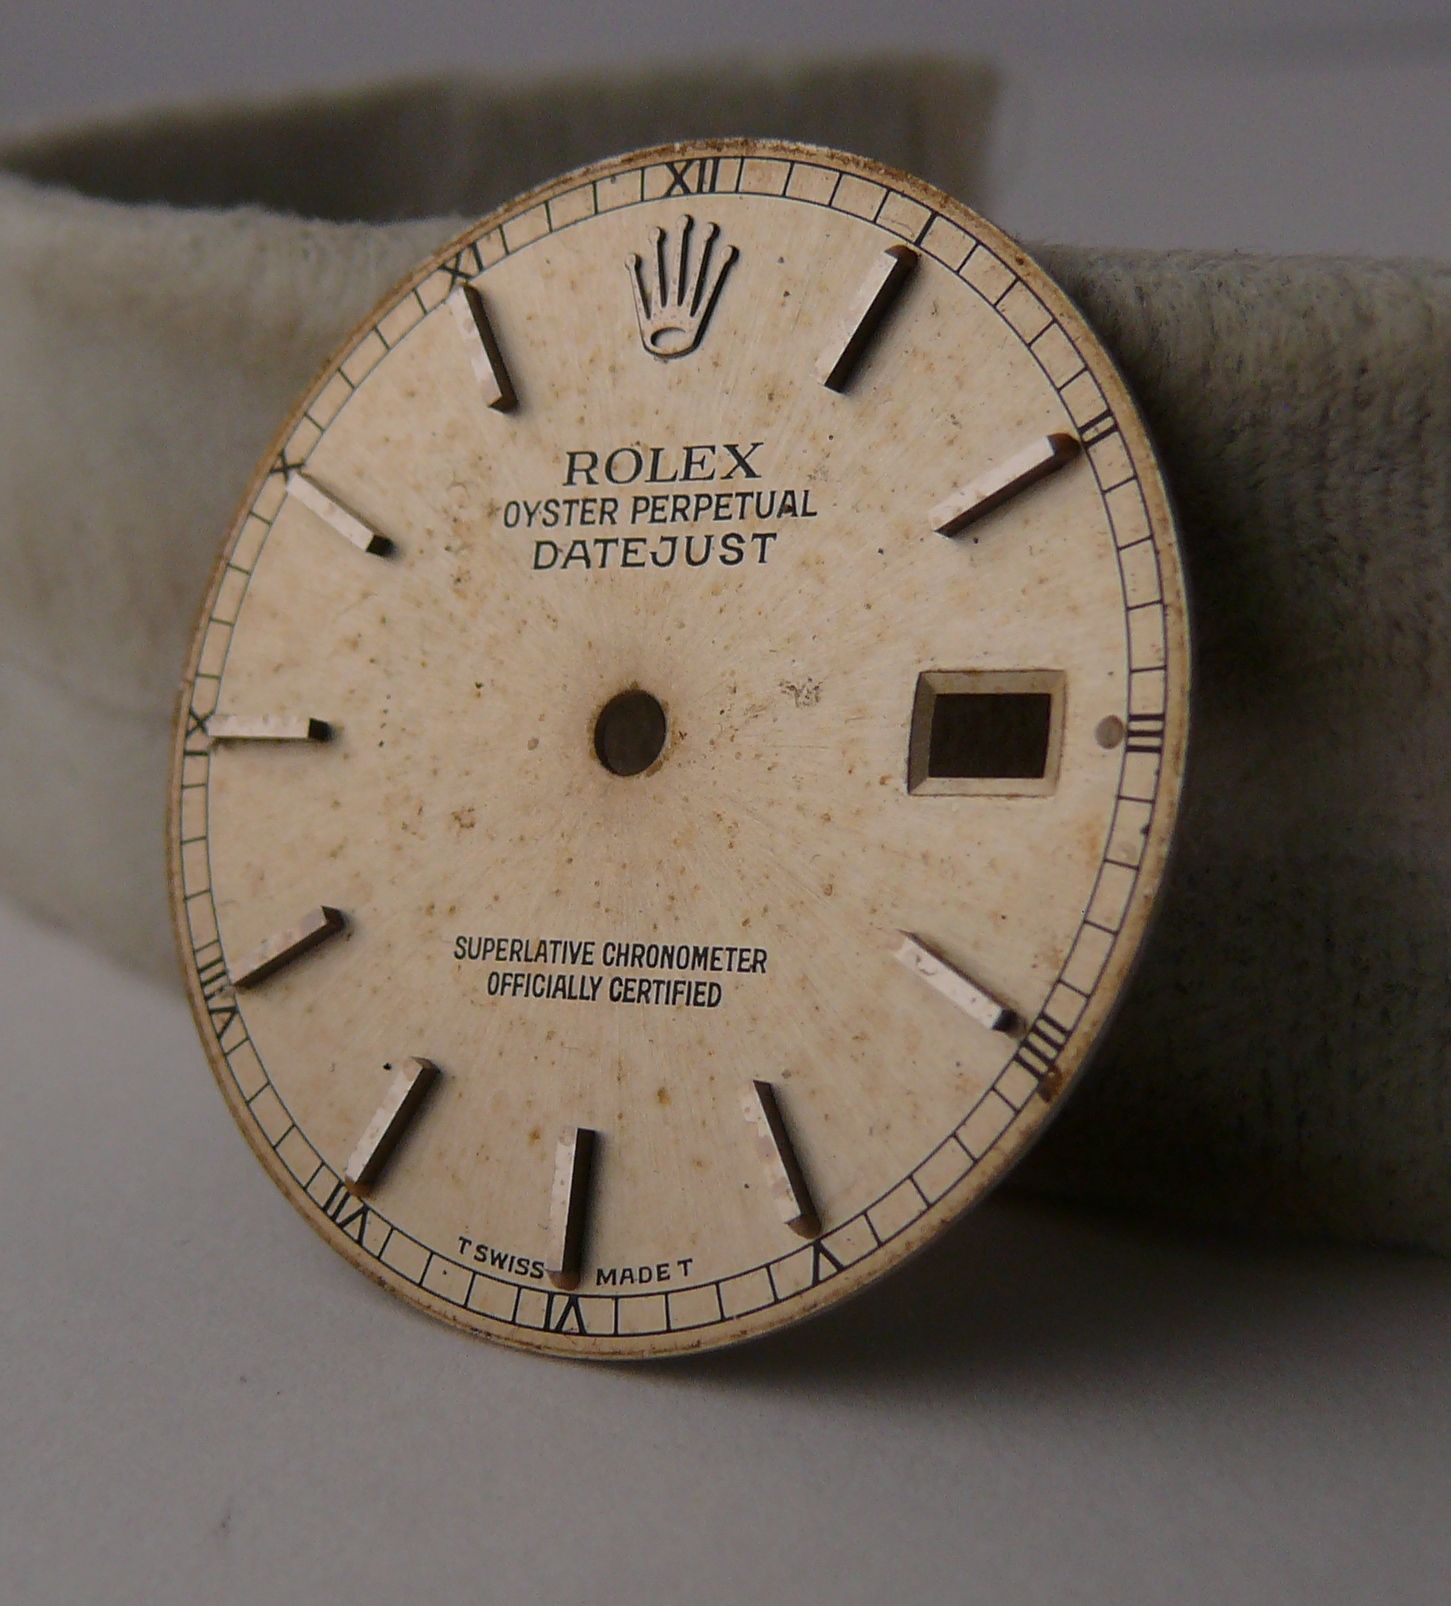 Vintage Gents Rolex Oyster Perpetual Datejust Dial 1601 1600 1603. Please note dial is in used but - Image 2 of 5